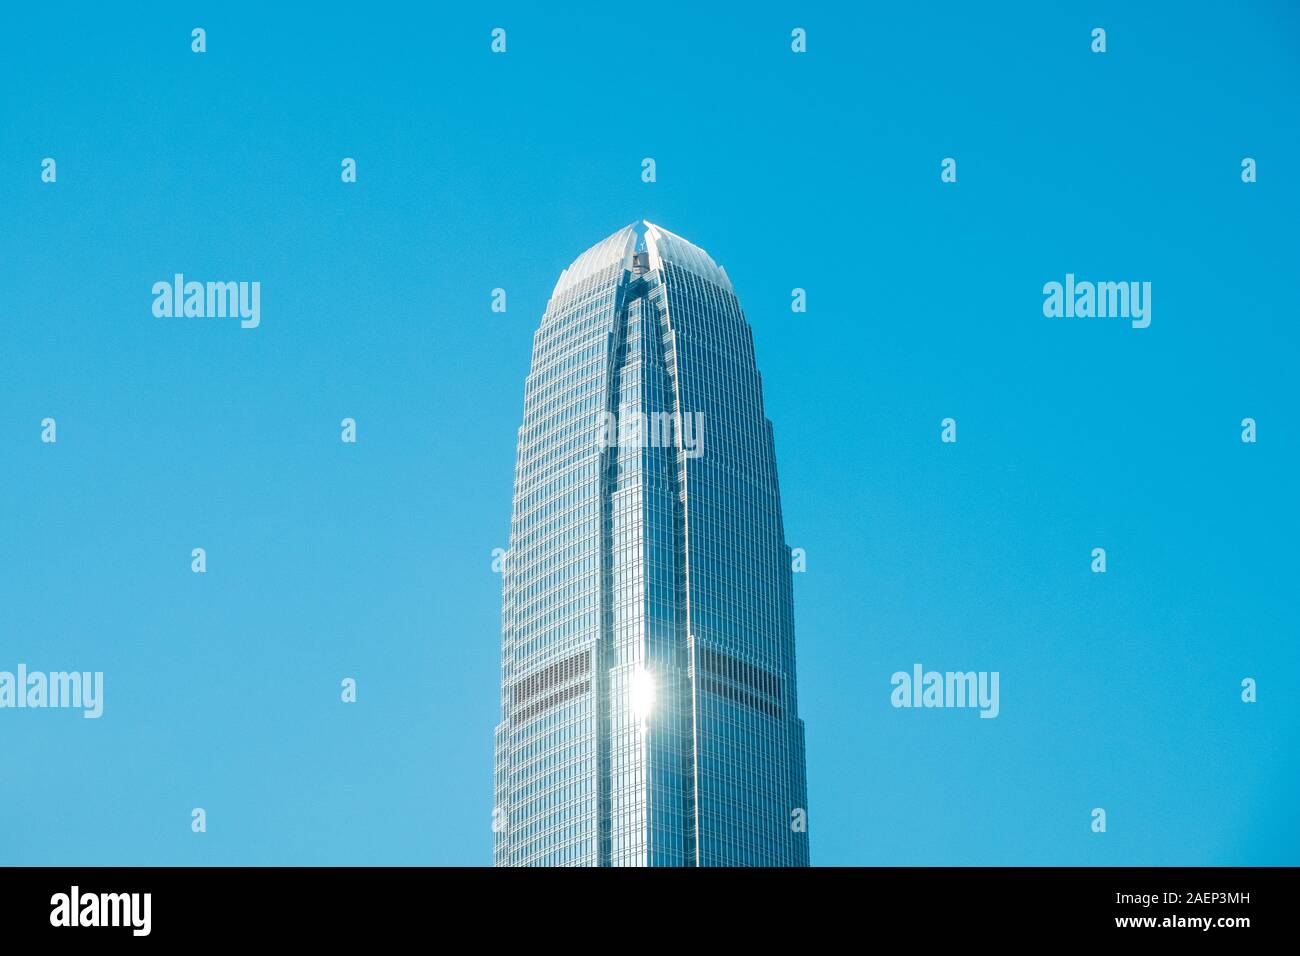 HongKong, China - November, 2019: Top of the two International Finance Centre skyscraper building in Central Hong Kong on clear blue sky Stock Photo